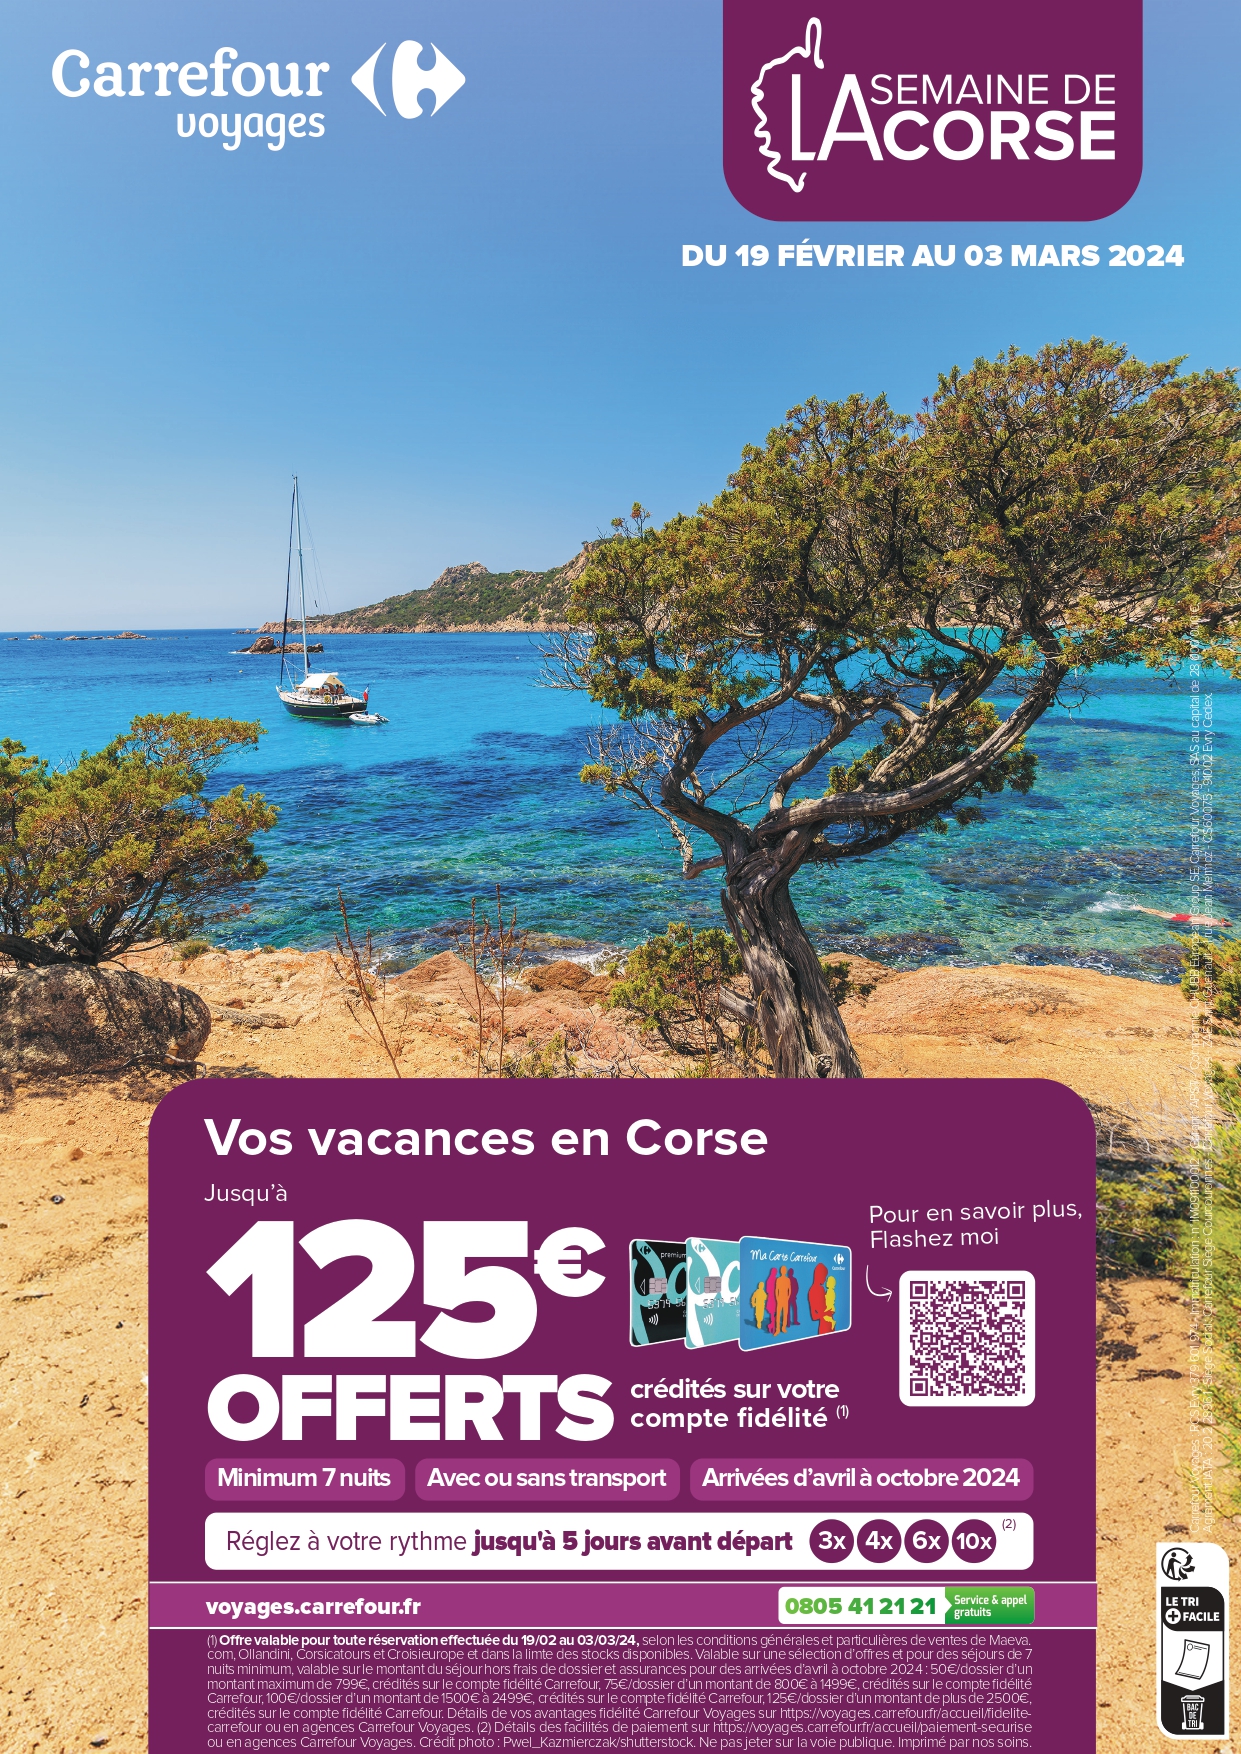 Image promotion : CARREFOR VOYAGES : CORSE